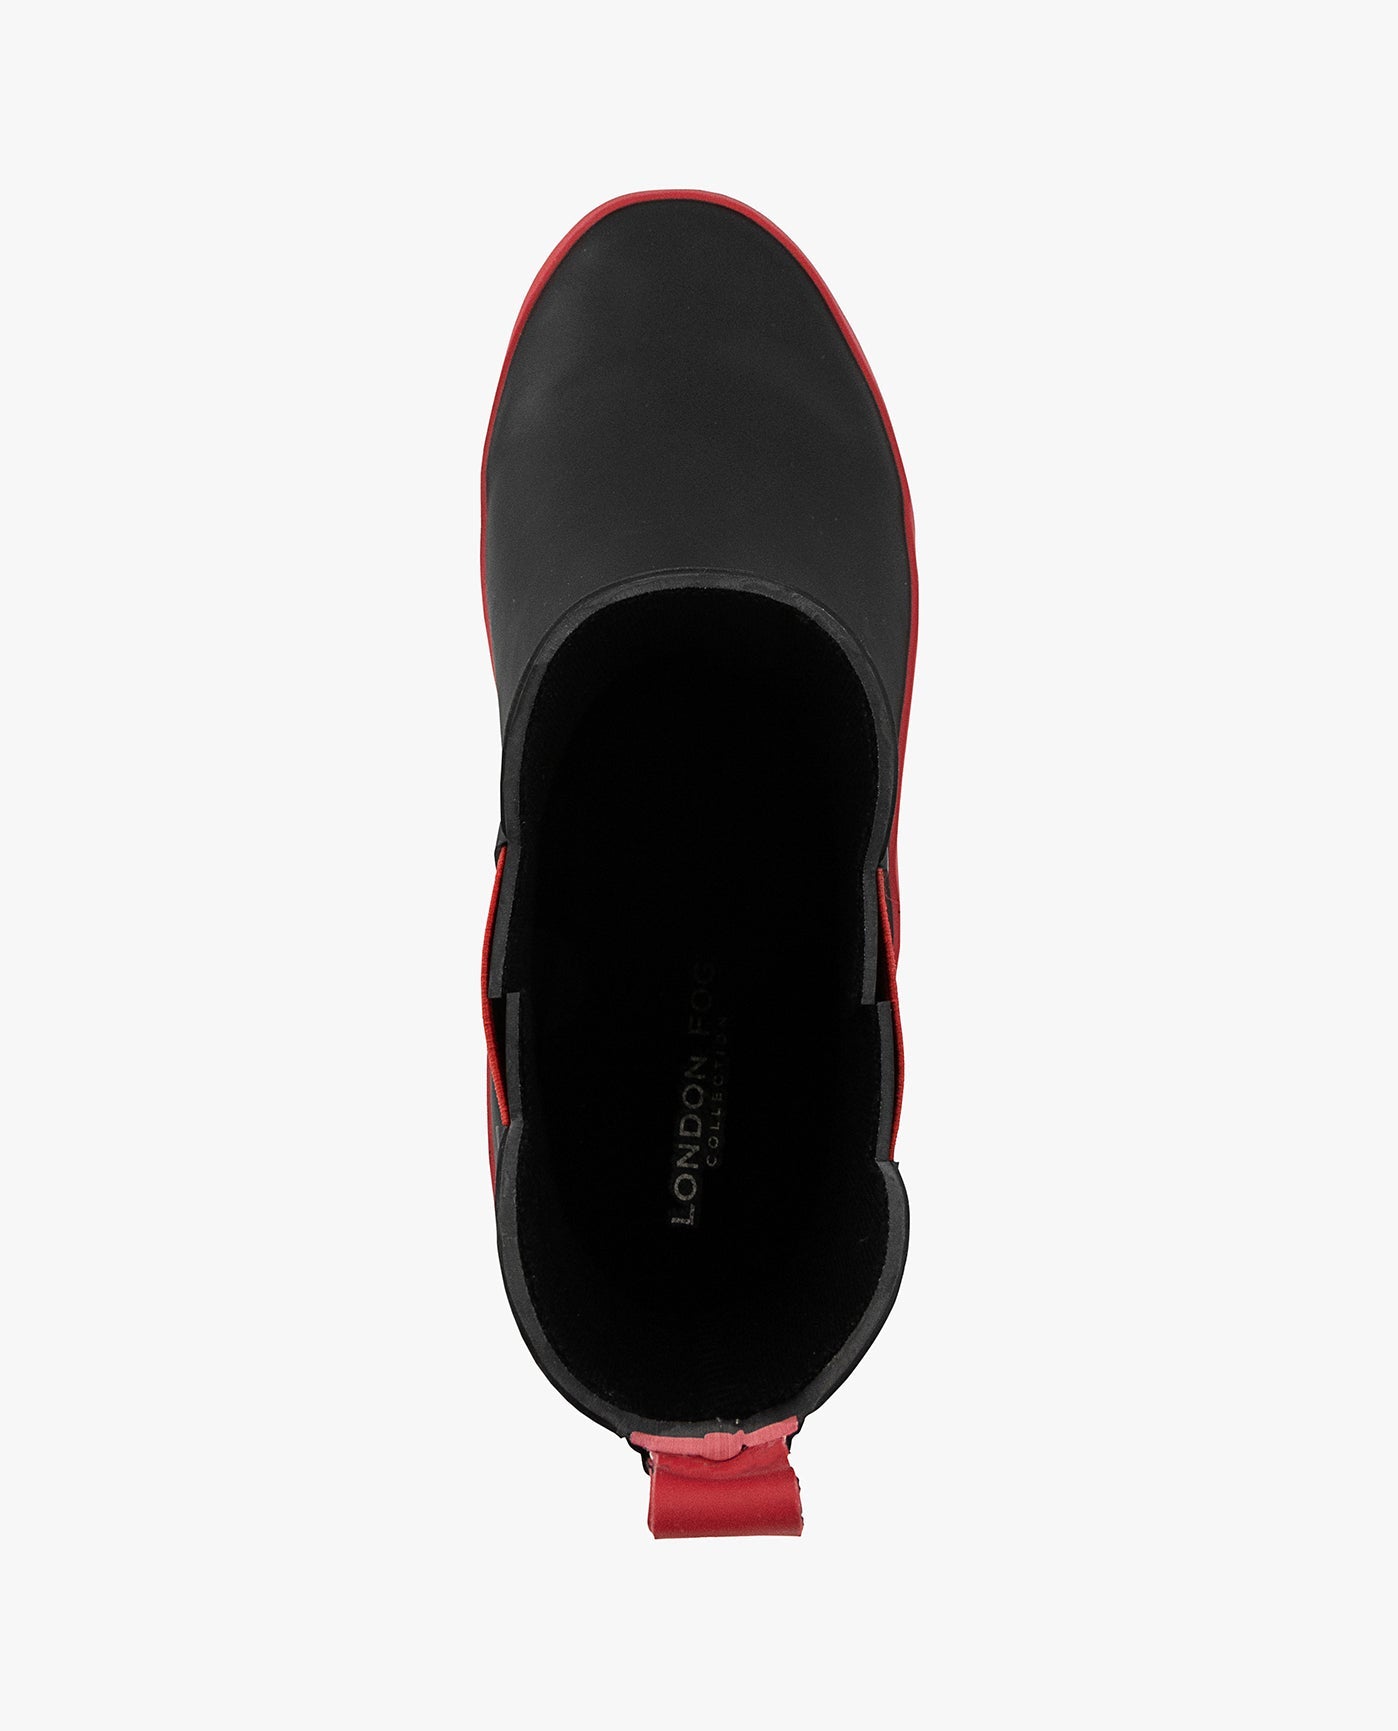 TOP VIEW  OF WOMENS WEMBLEY ANKLE RAINBOOT | ESO_BLACK RED_001